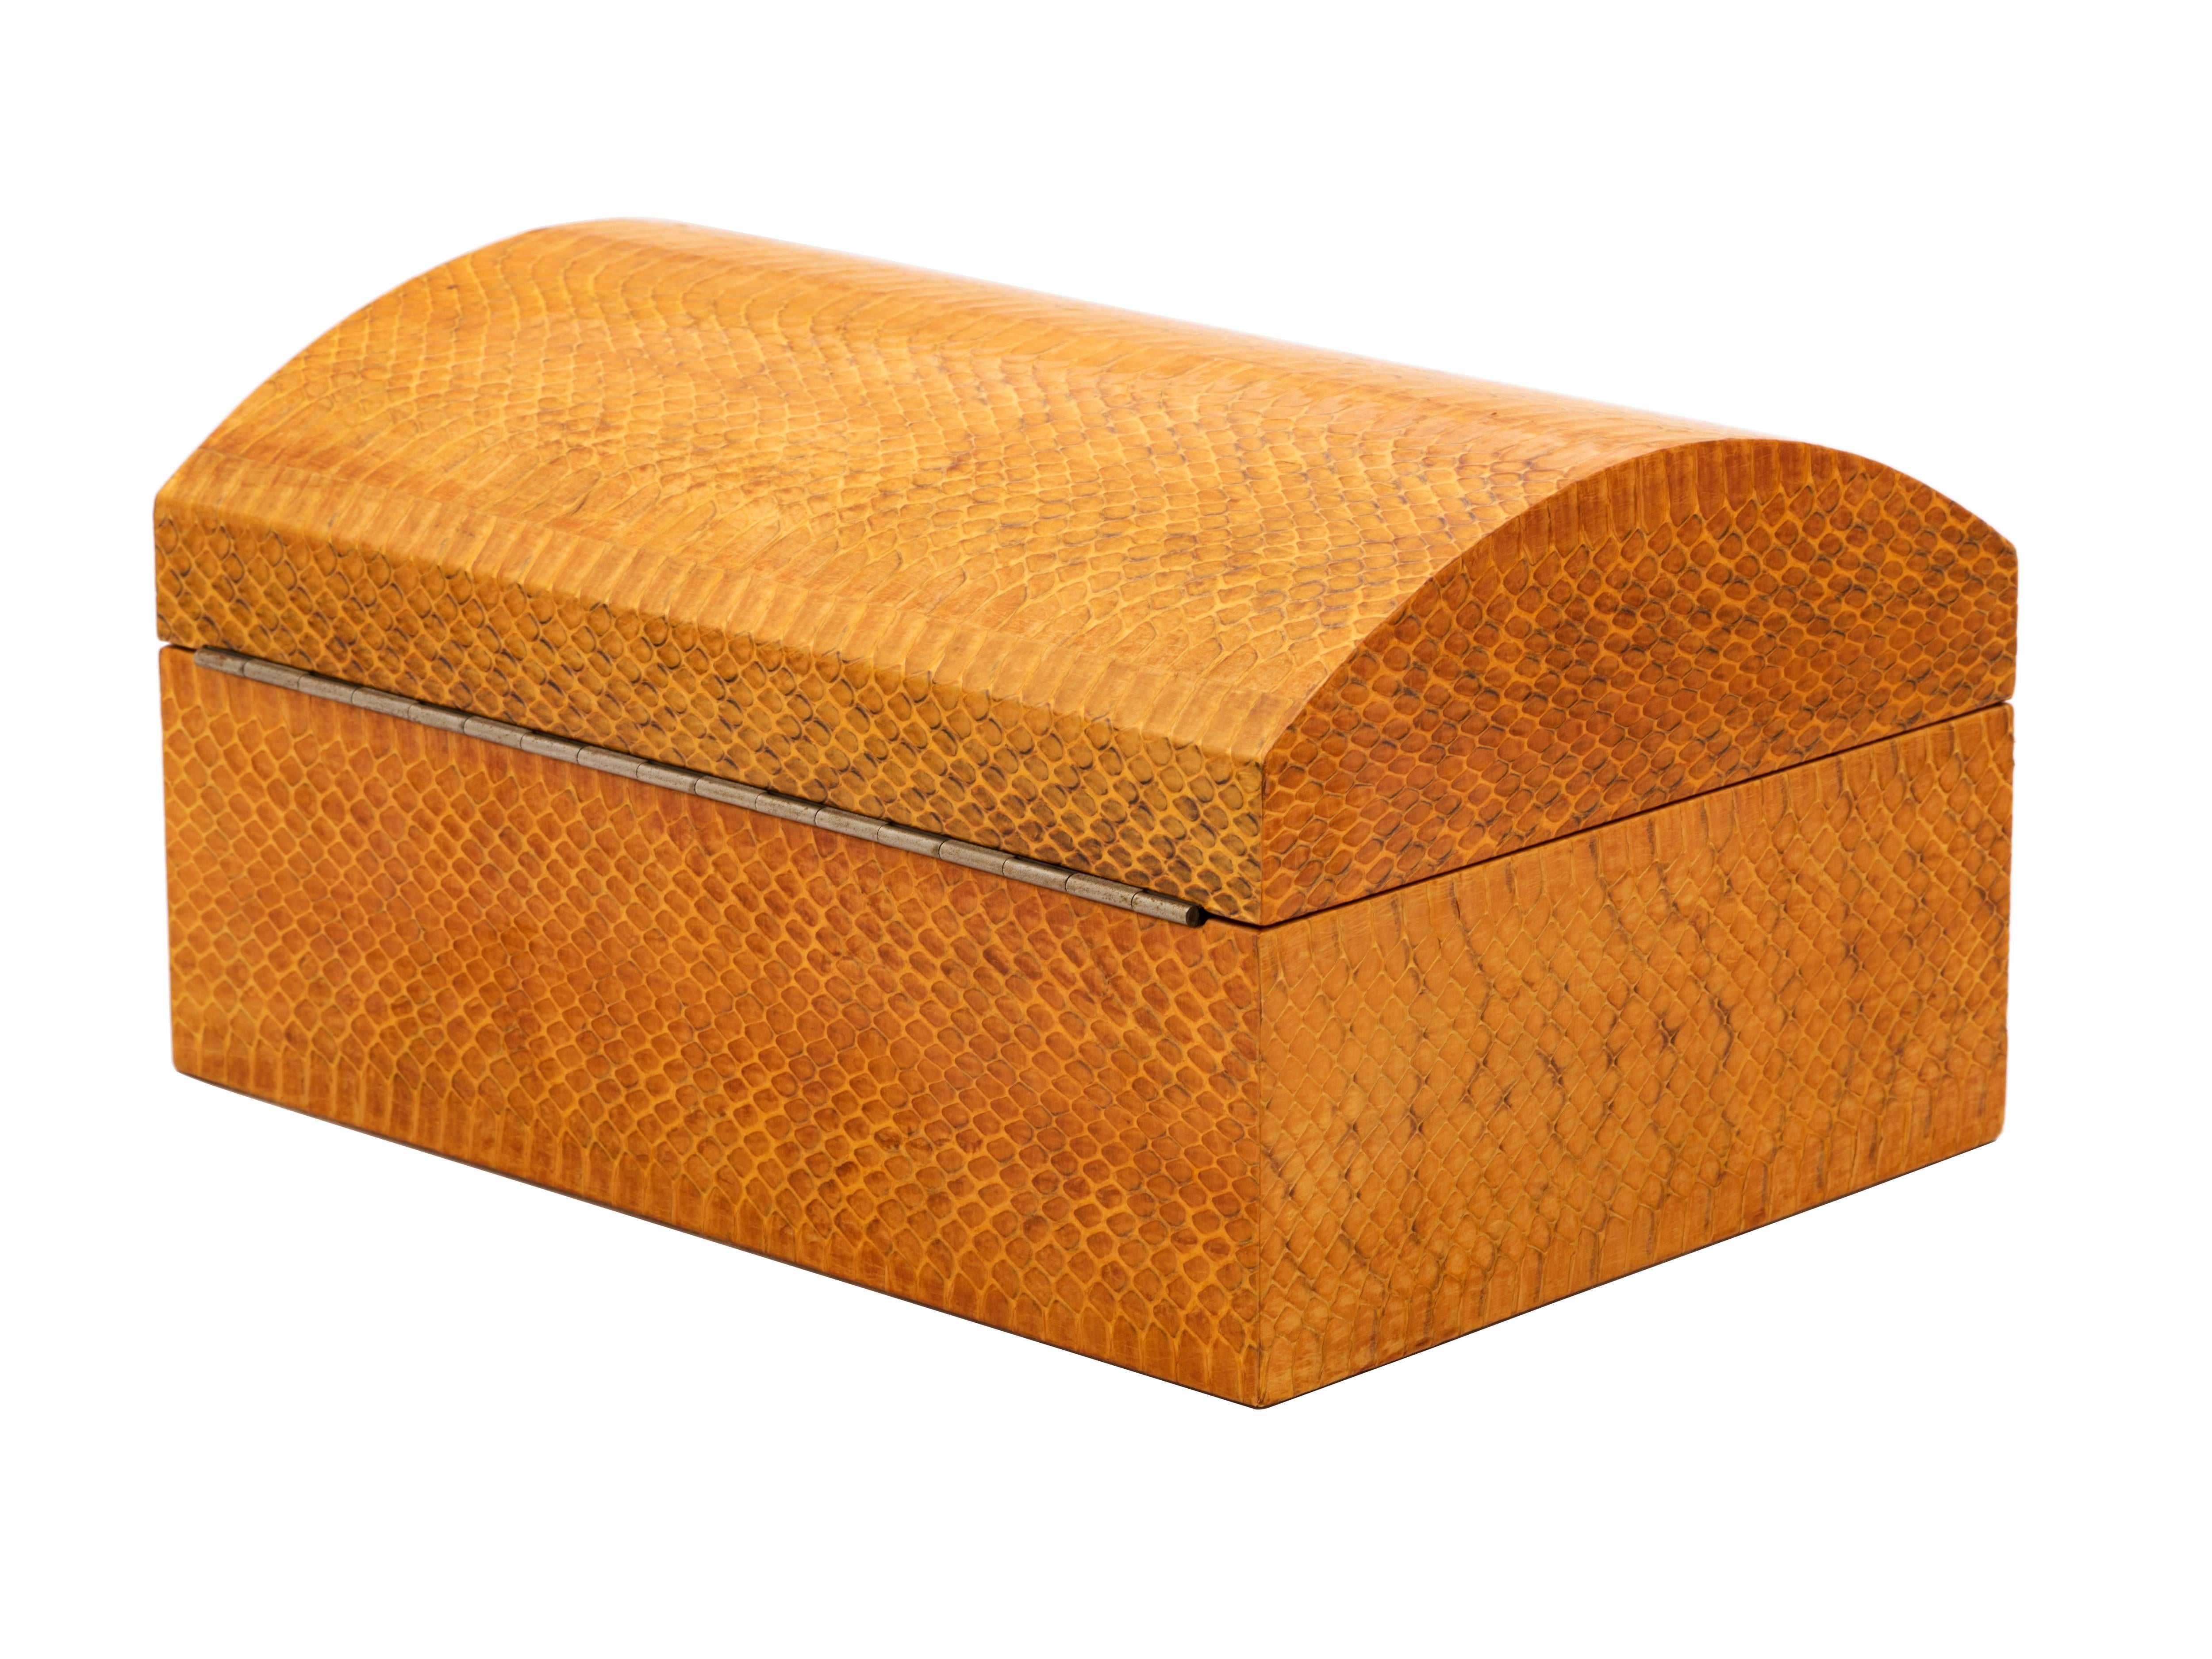 A scrupulously-crafted, decorative trinket or jewelry box by Karl Springer comprising a rectangular body with a domed, hinged lid and a suede-lined interior. The outside is wrapped entirely in lacquered snakeskin in a rich, warm honey color with